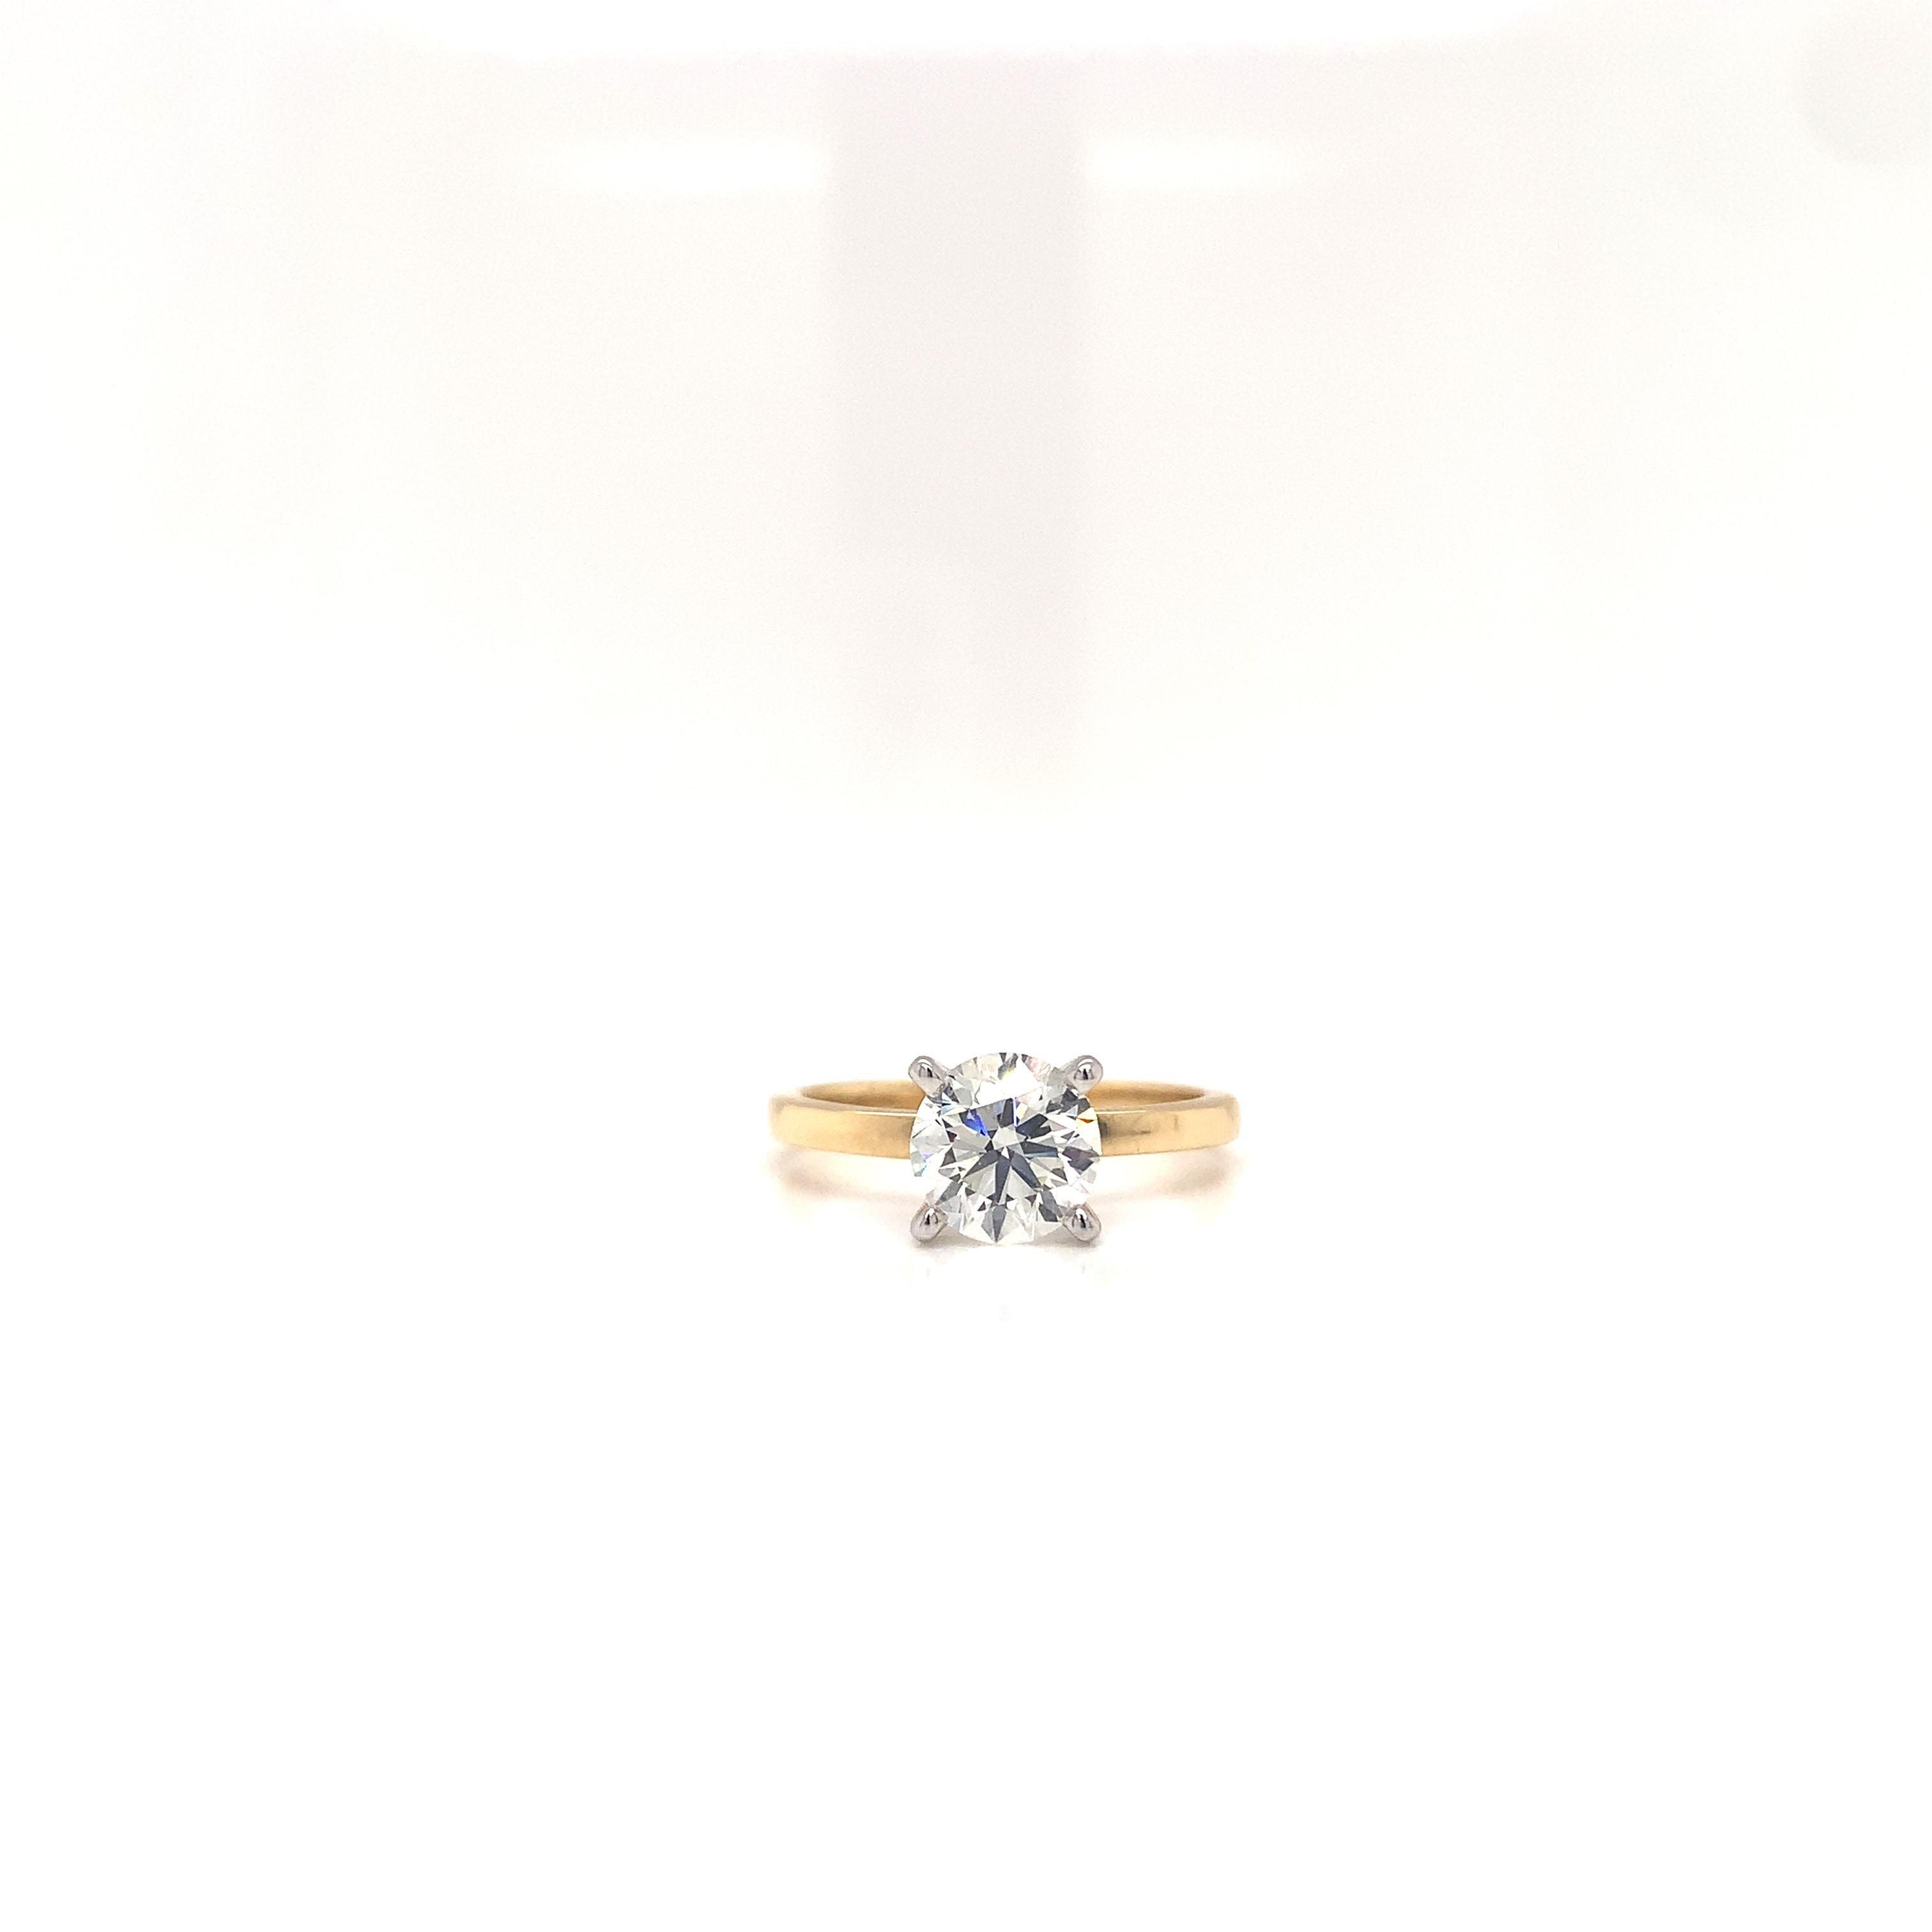 Classic Solitaire 18 Karat Yellow Gold engagement Diamond ring 1.30 Carat Round Brilliant Certified by Gia as I - Color , VVS1 Clarity, Excellent - Cut ,  Excellent - Polish , Excellent - Symmetry, The ring weighs 3.3 grams , and is currently size